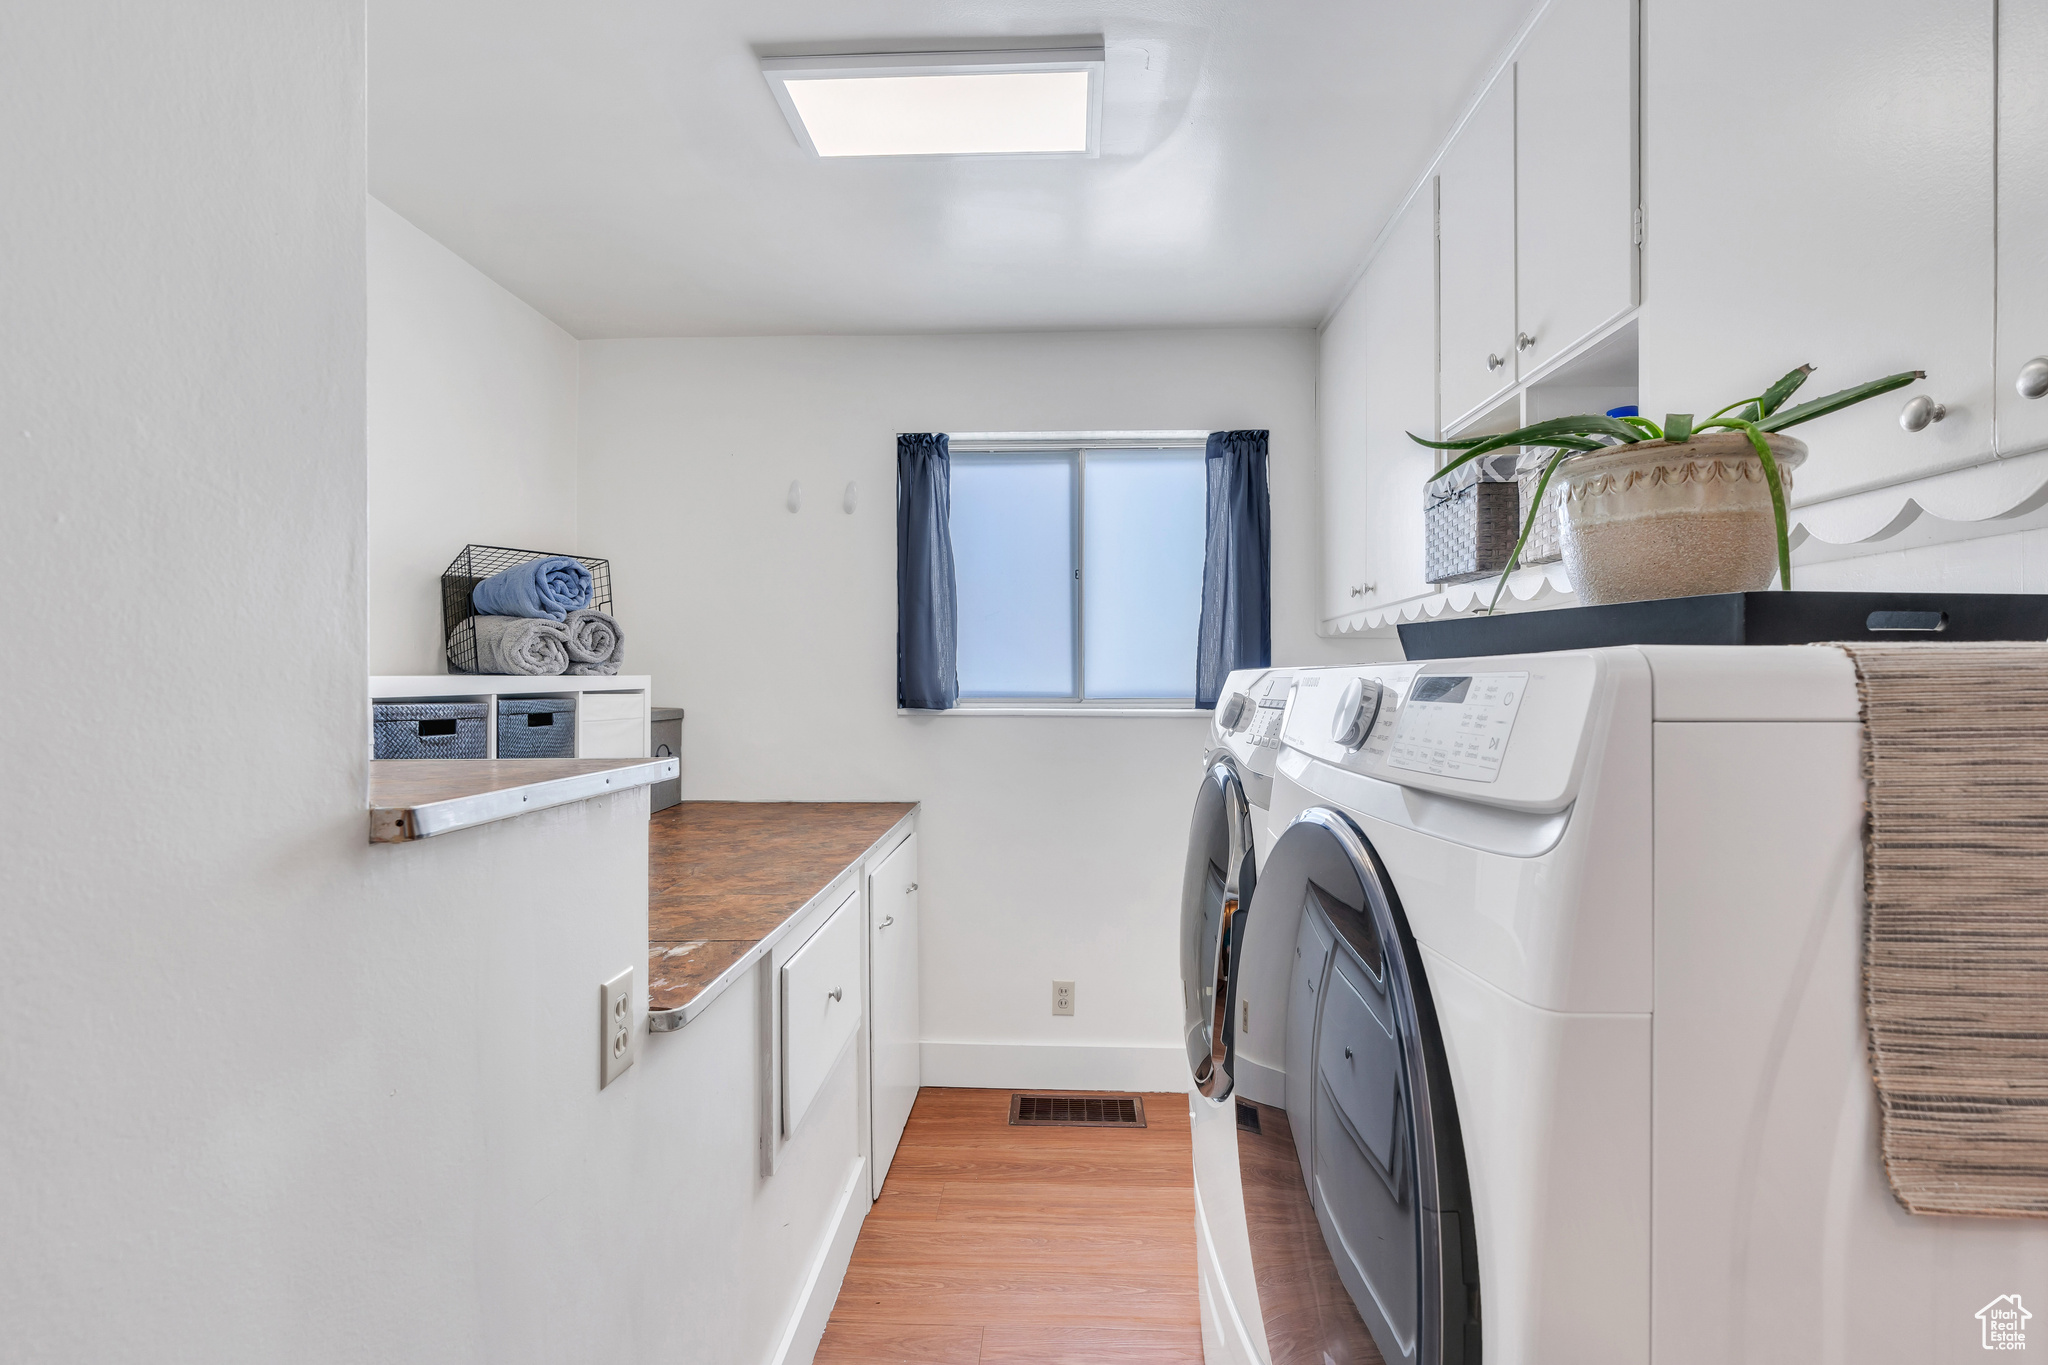 Laundry Room with large sink, folding area & spacious storage